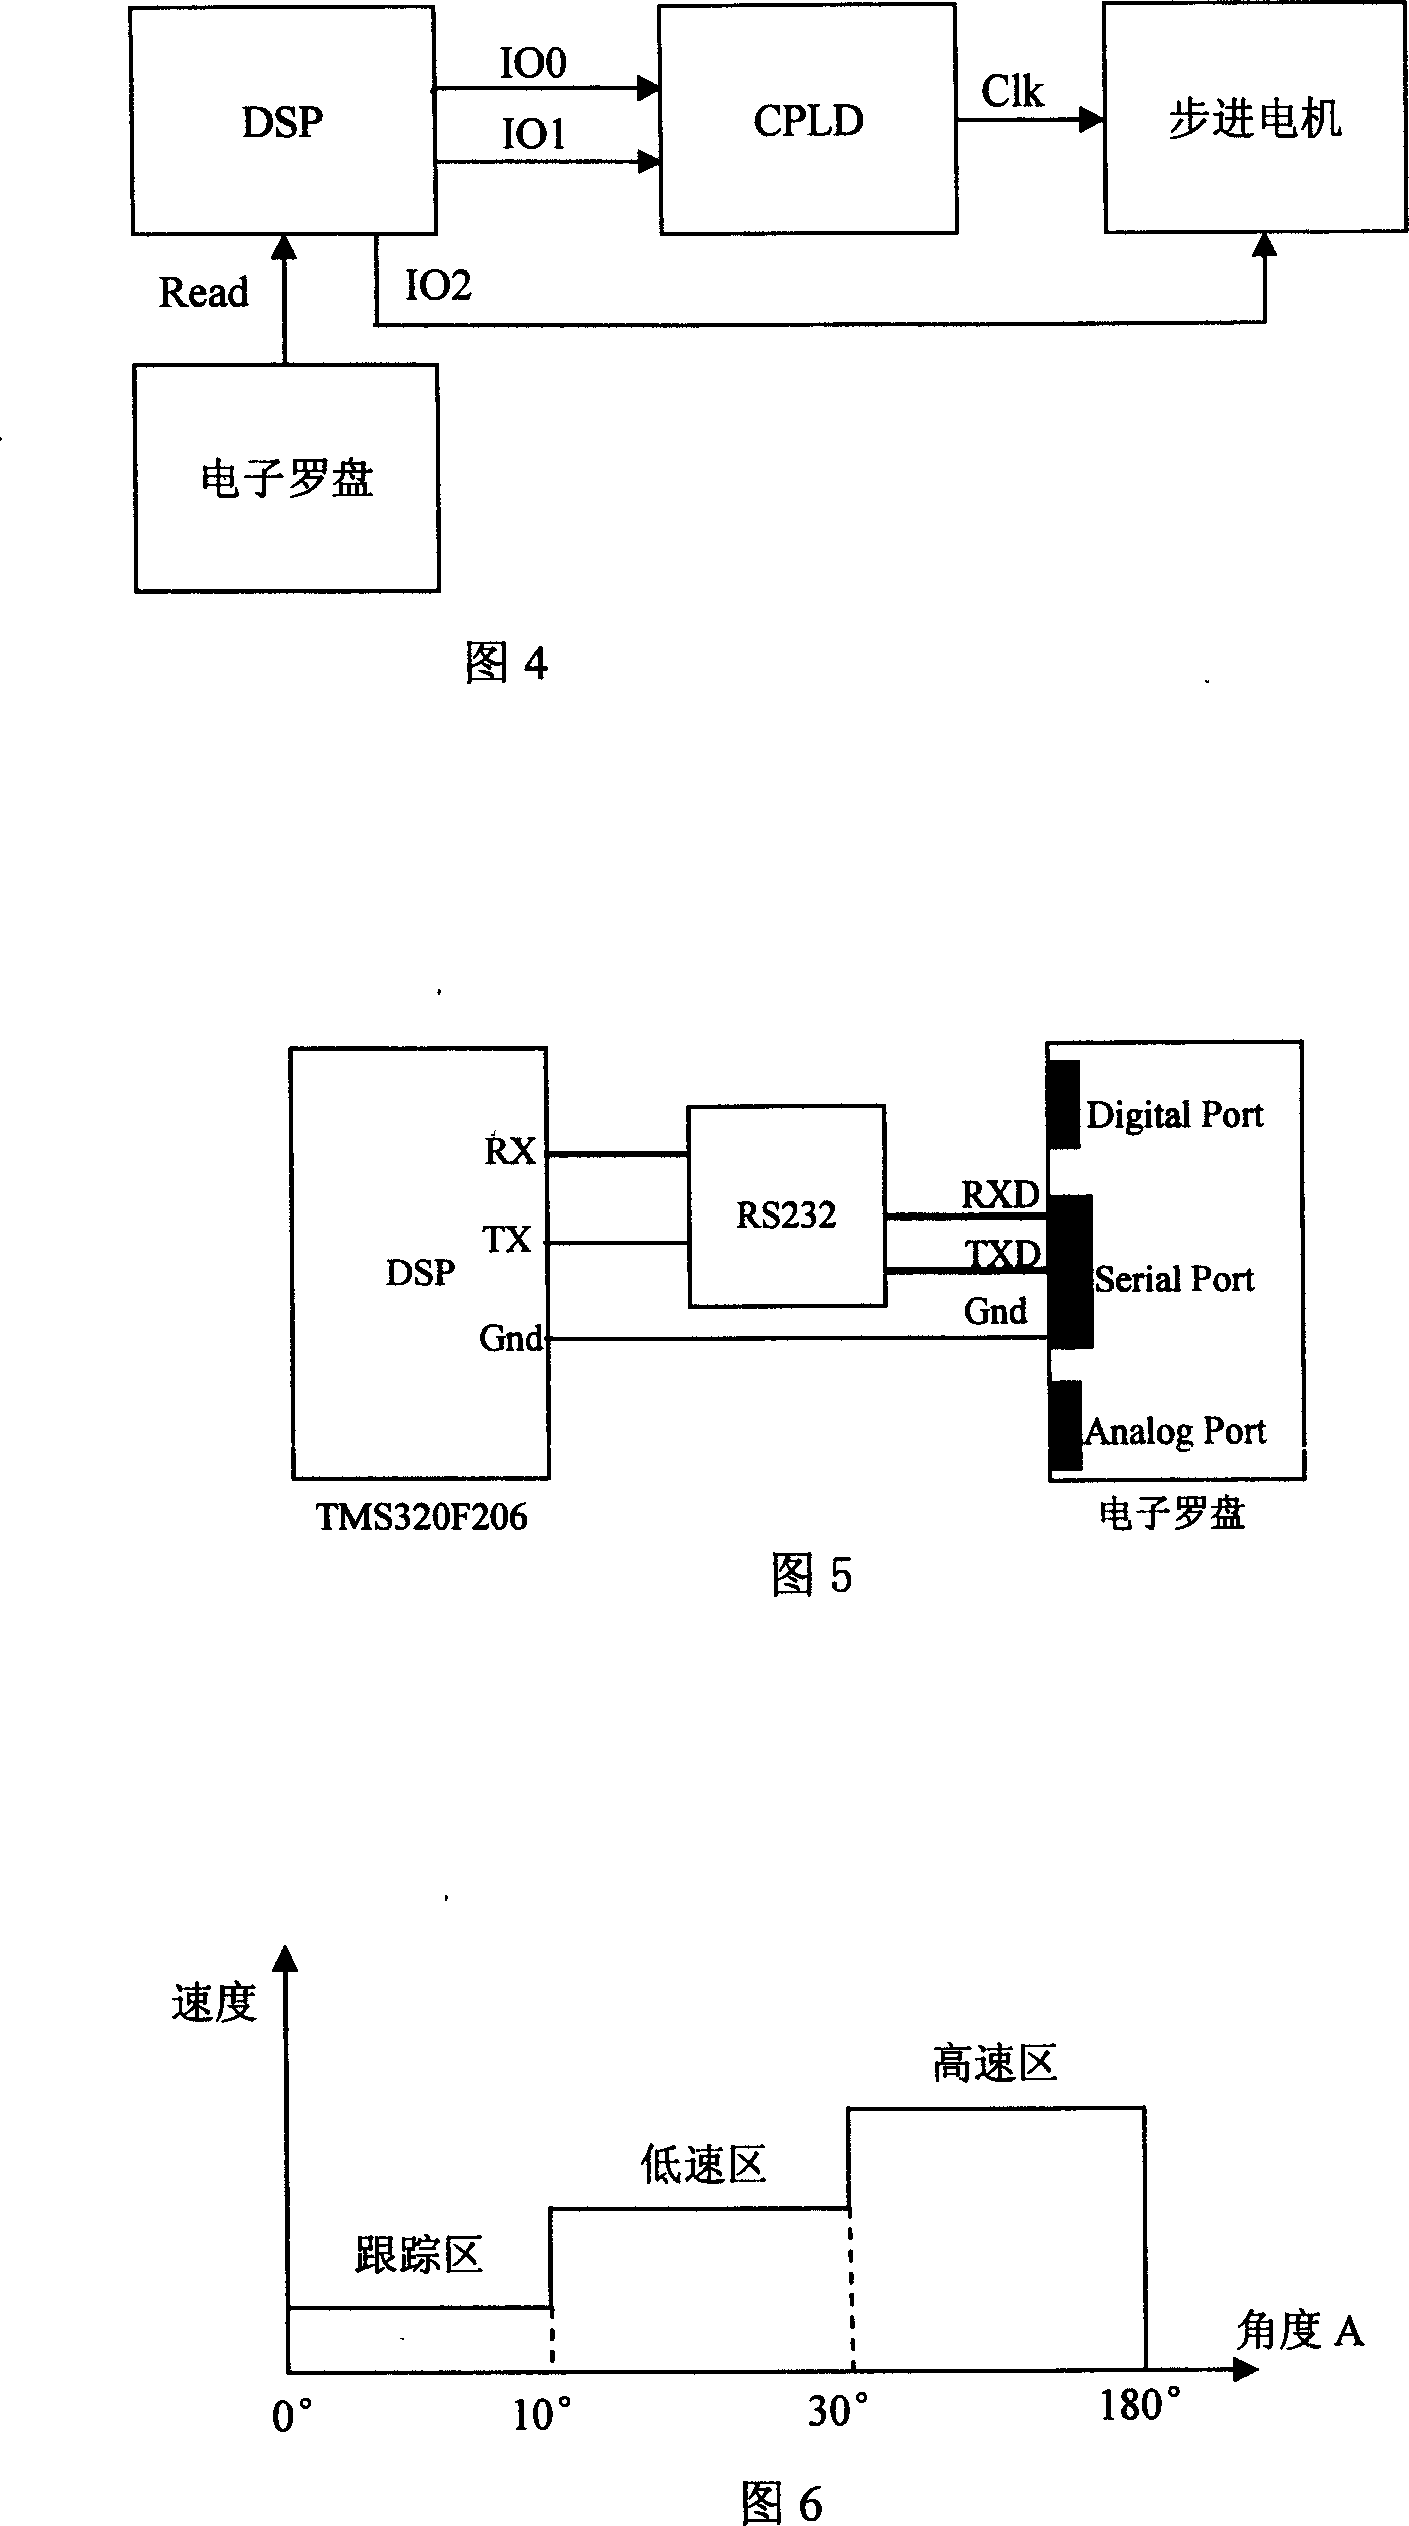 Device for implementing rough north-seeking of gyroscope using electronic compass